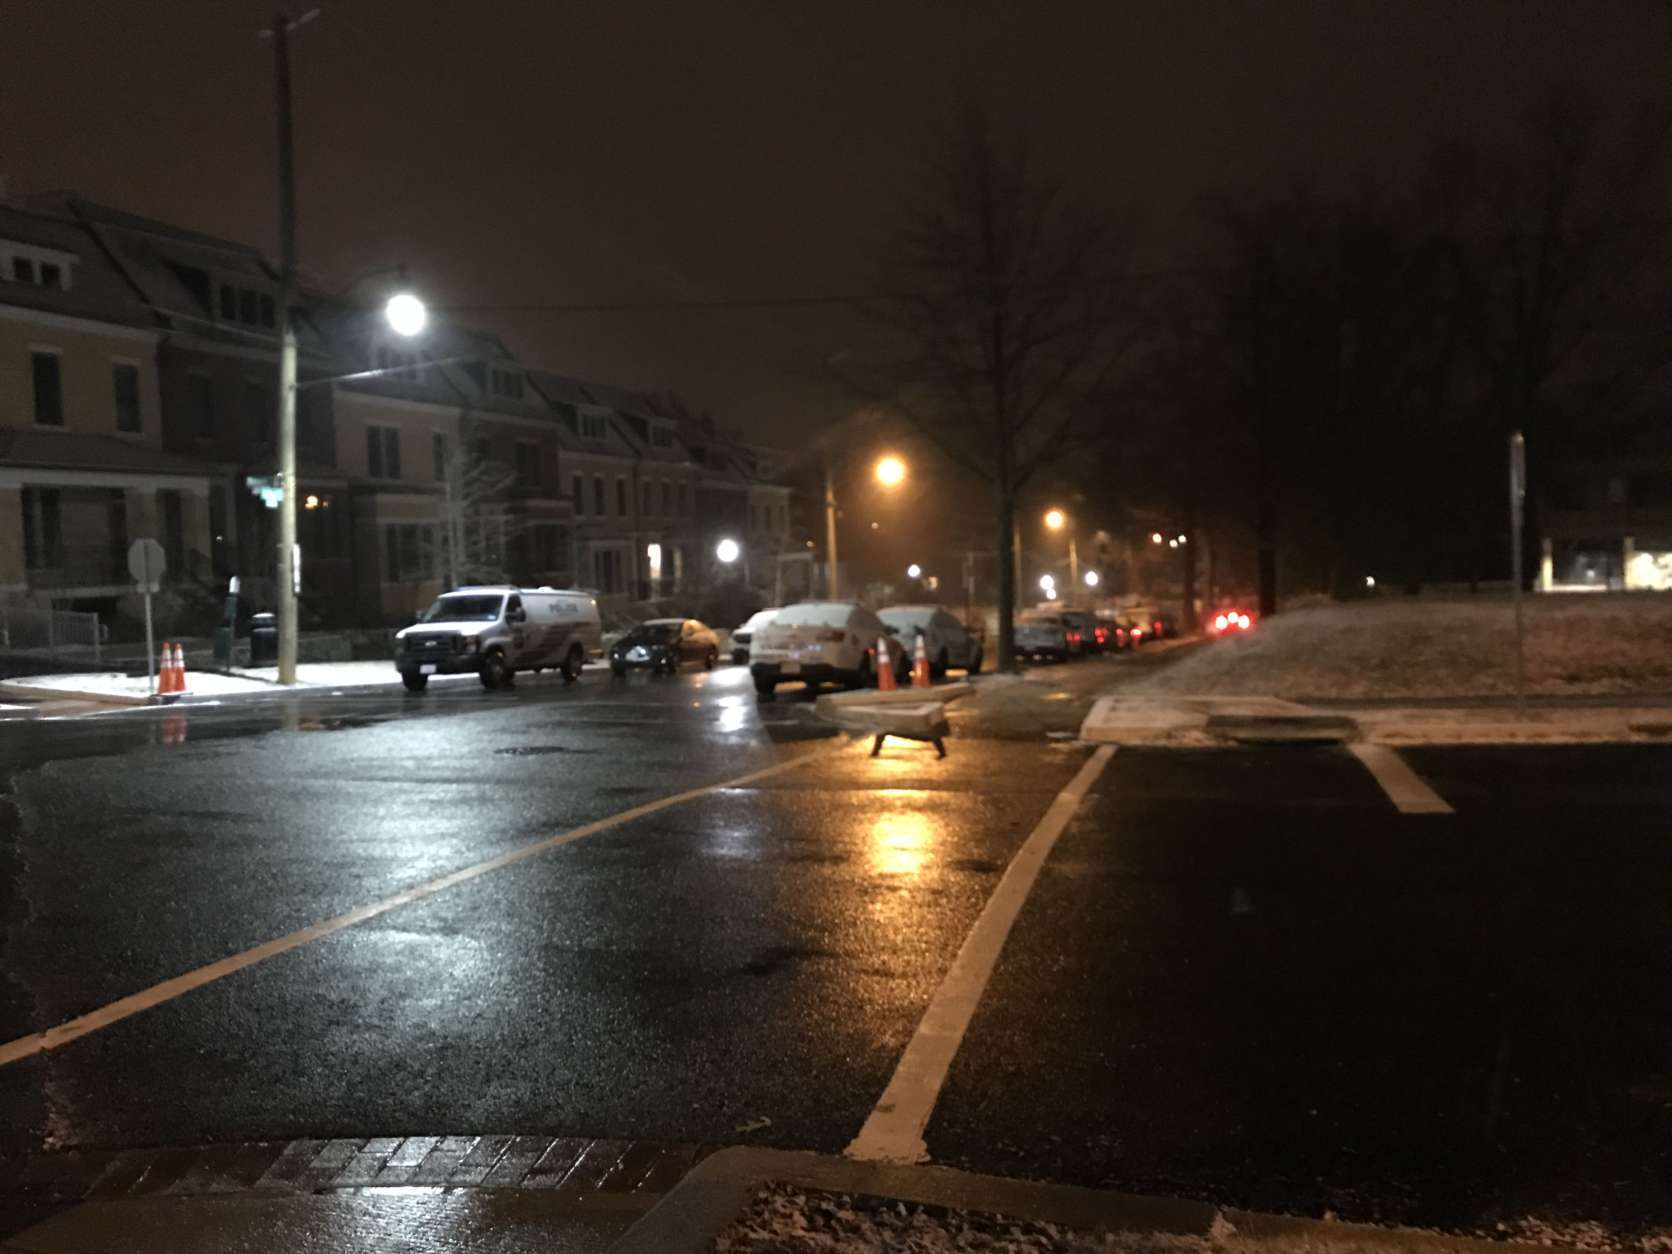 Main roads are wet but not too slick in Northwest D.C. Wednesday morning. (WTOP/Reem Nadeem)